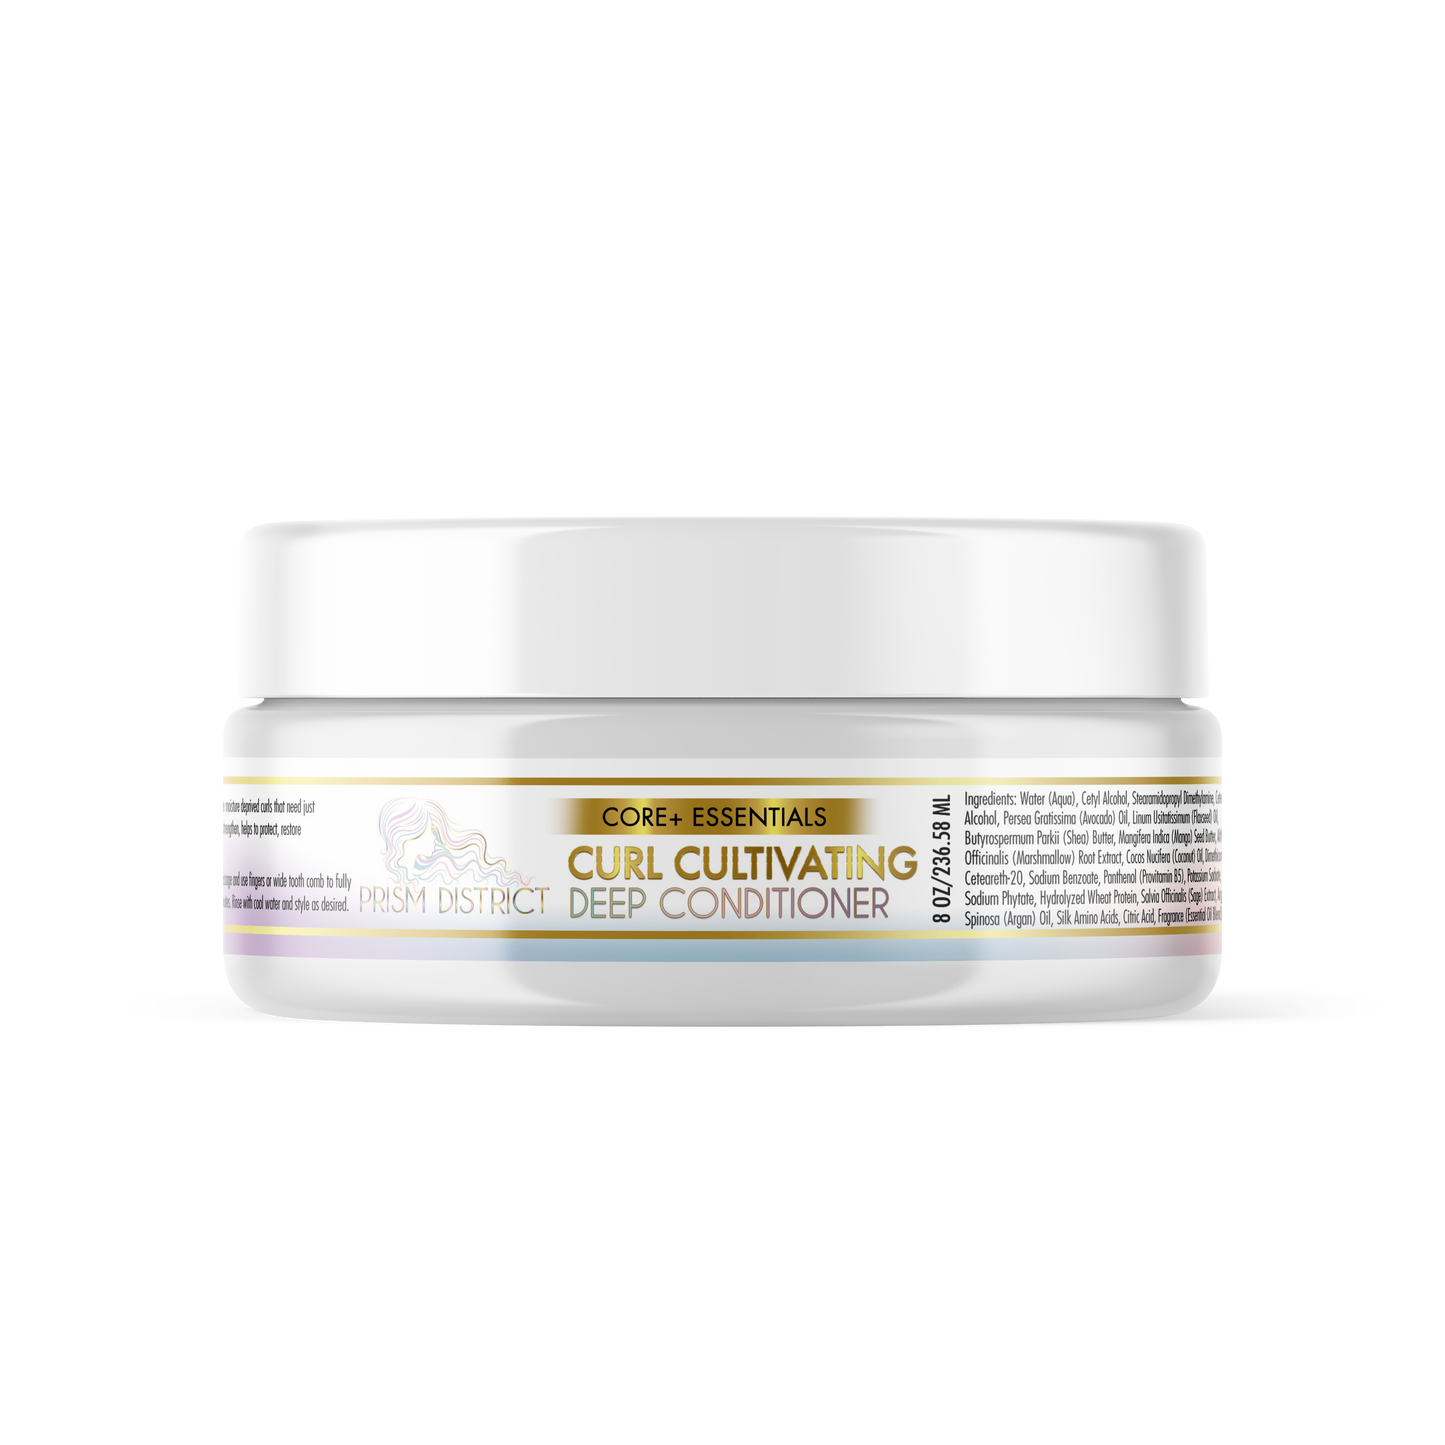 CURL CULTIVATING DEEP CONDITIONER